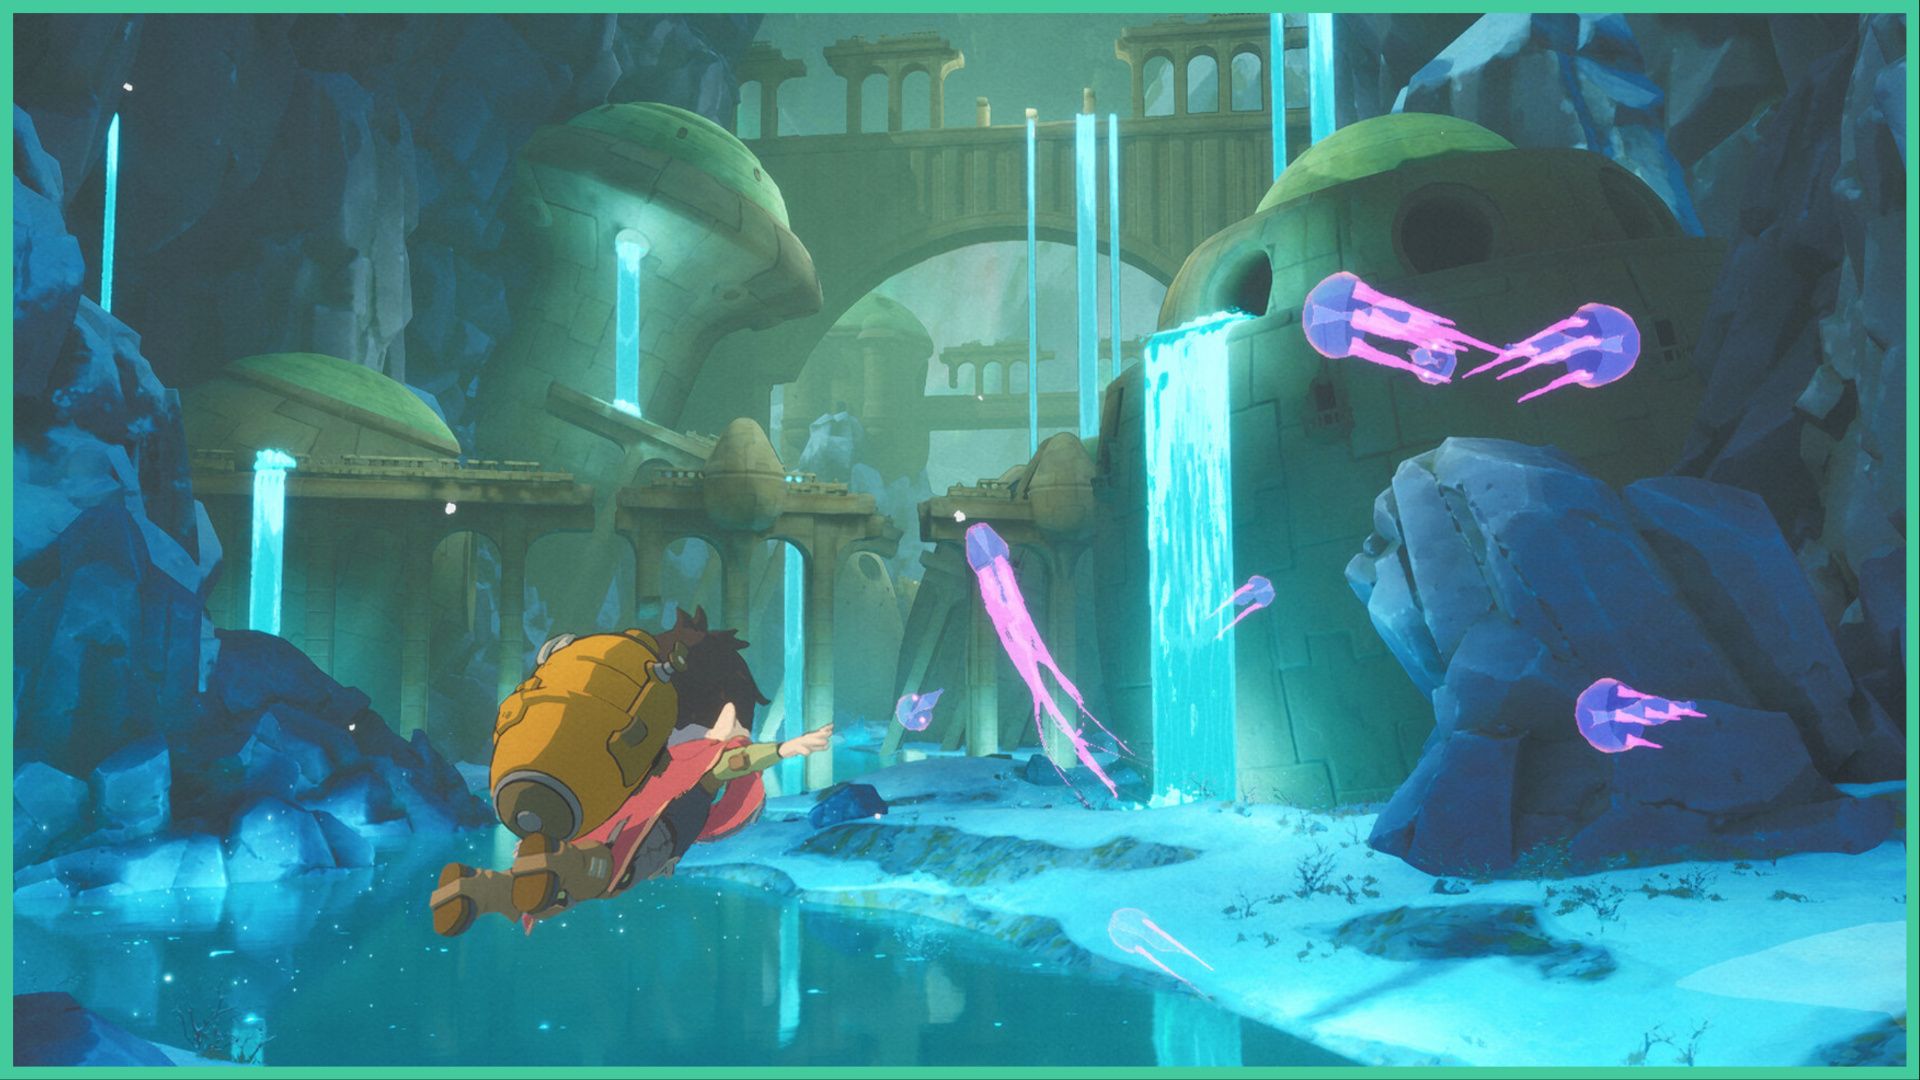 feature image for our europa news, the image features a screenshot from the game of the main character zee swimming underwater as jellyfish float nearby, there are ancient ruins in the distance with water pouring down surrounded by rock structures and a sparkling lake below zee